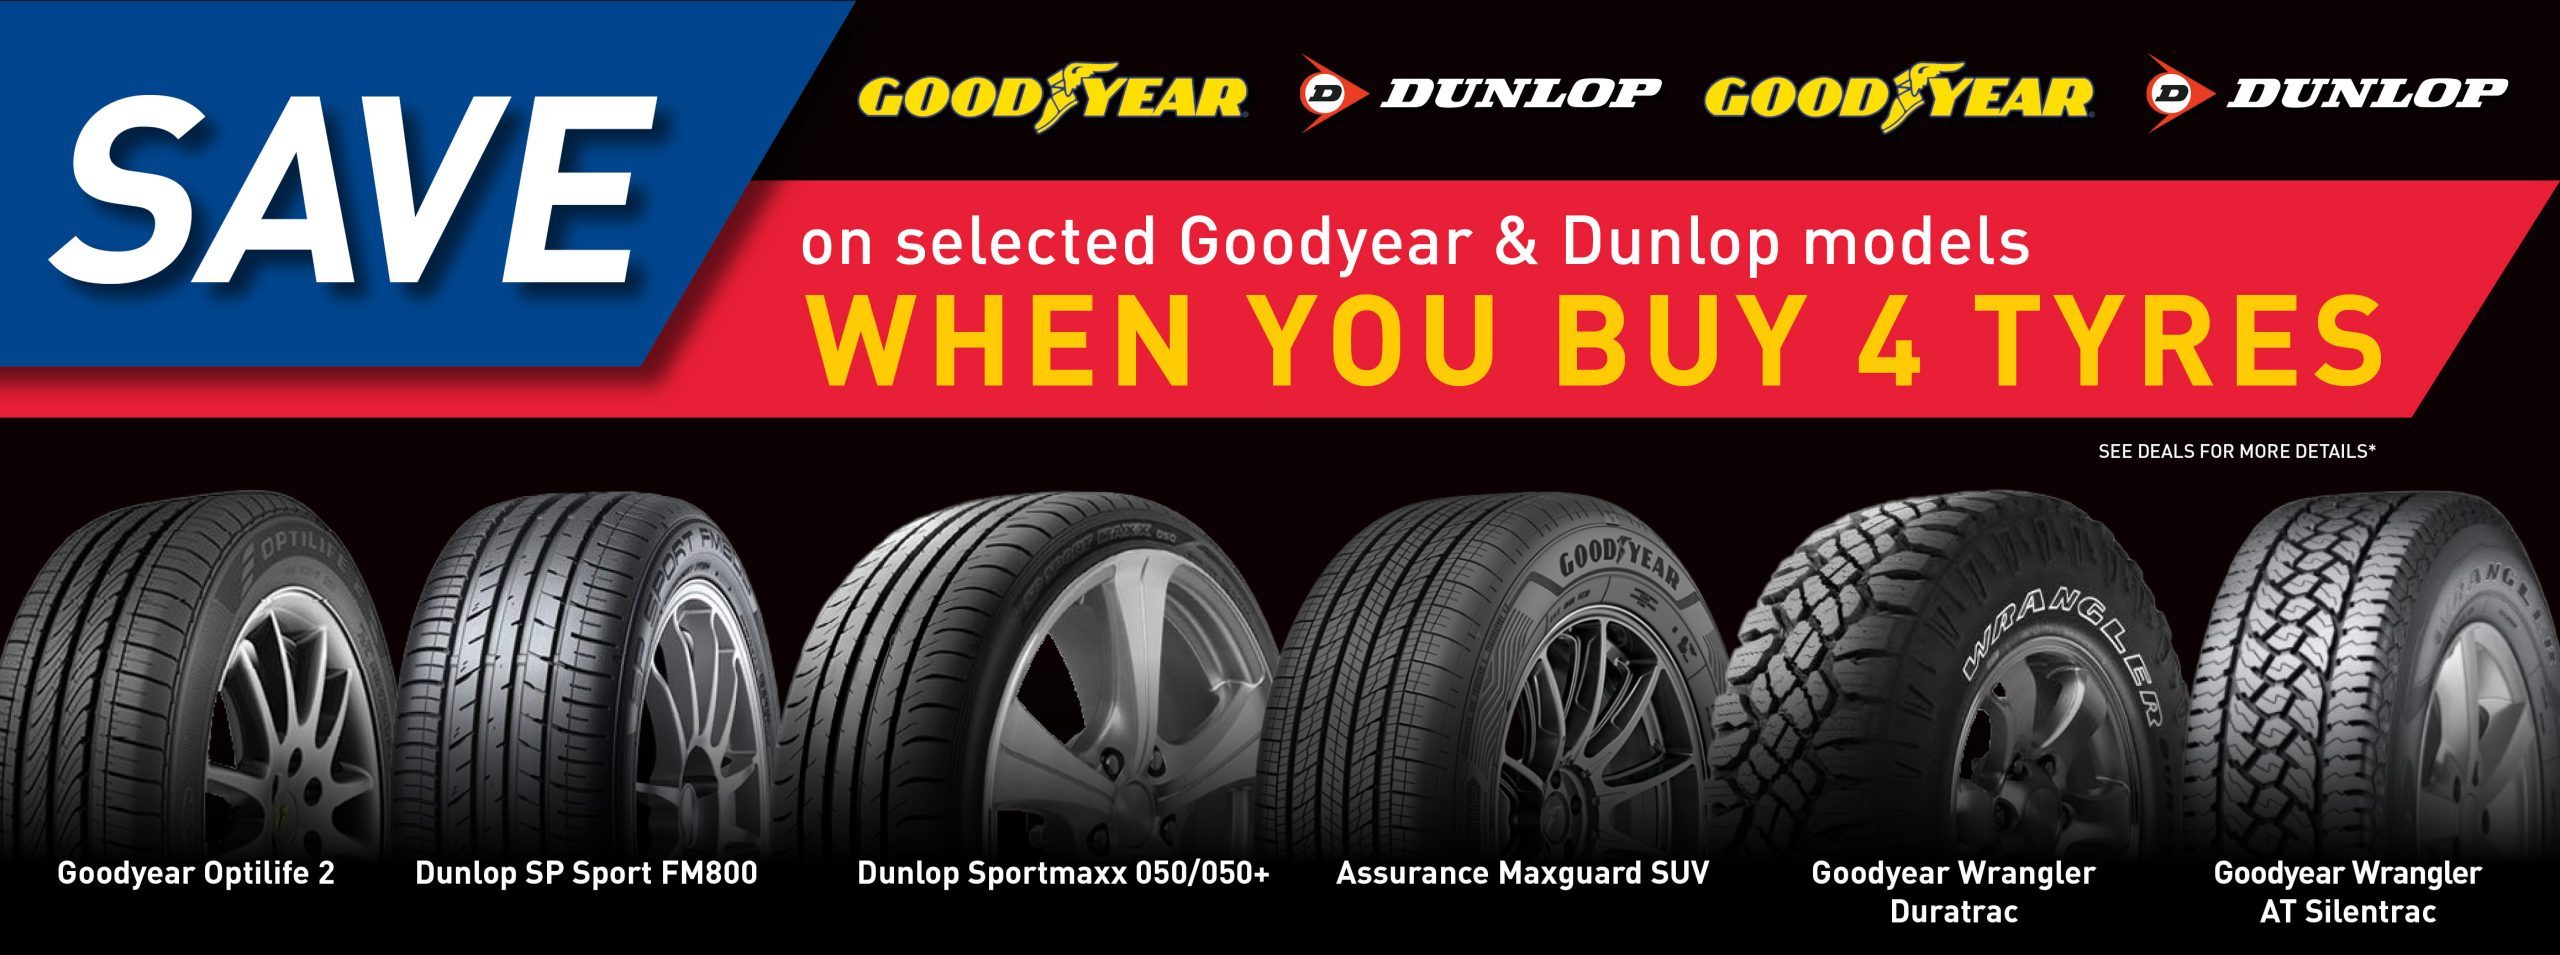 Latest Goodyear & Dunlop tyre deals now on at your local tyrepower stores